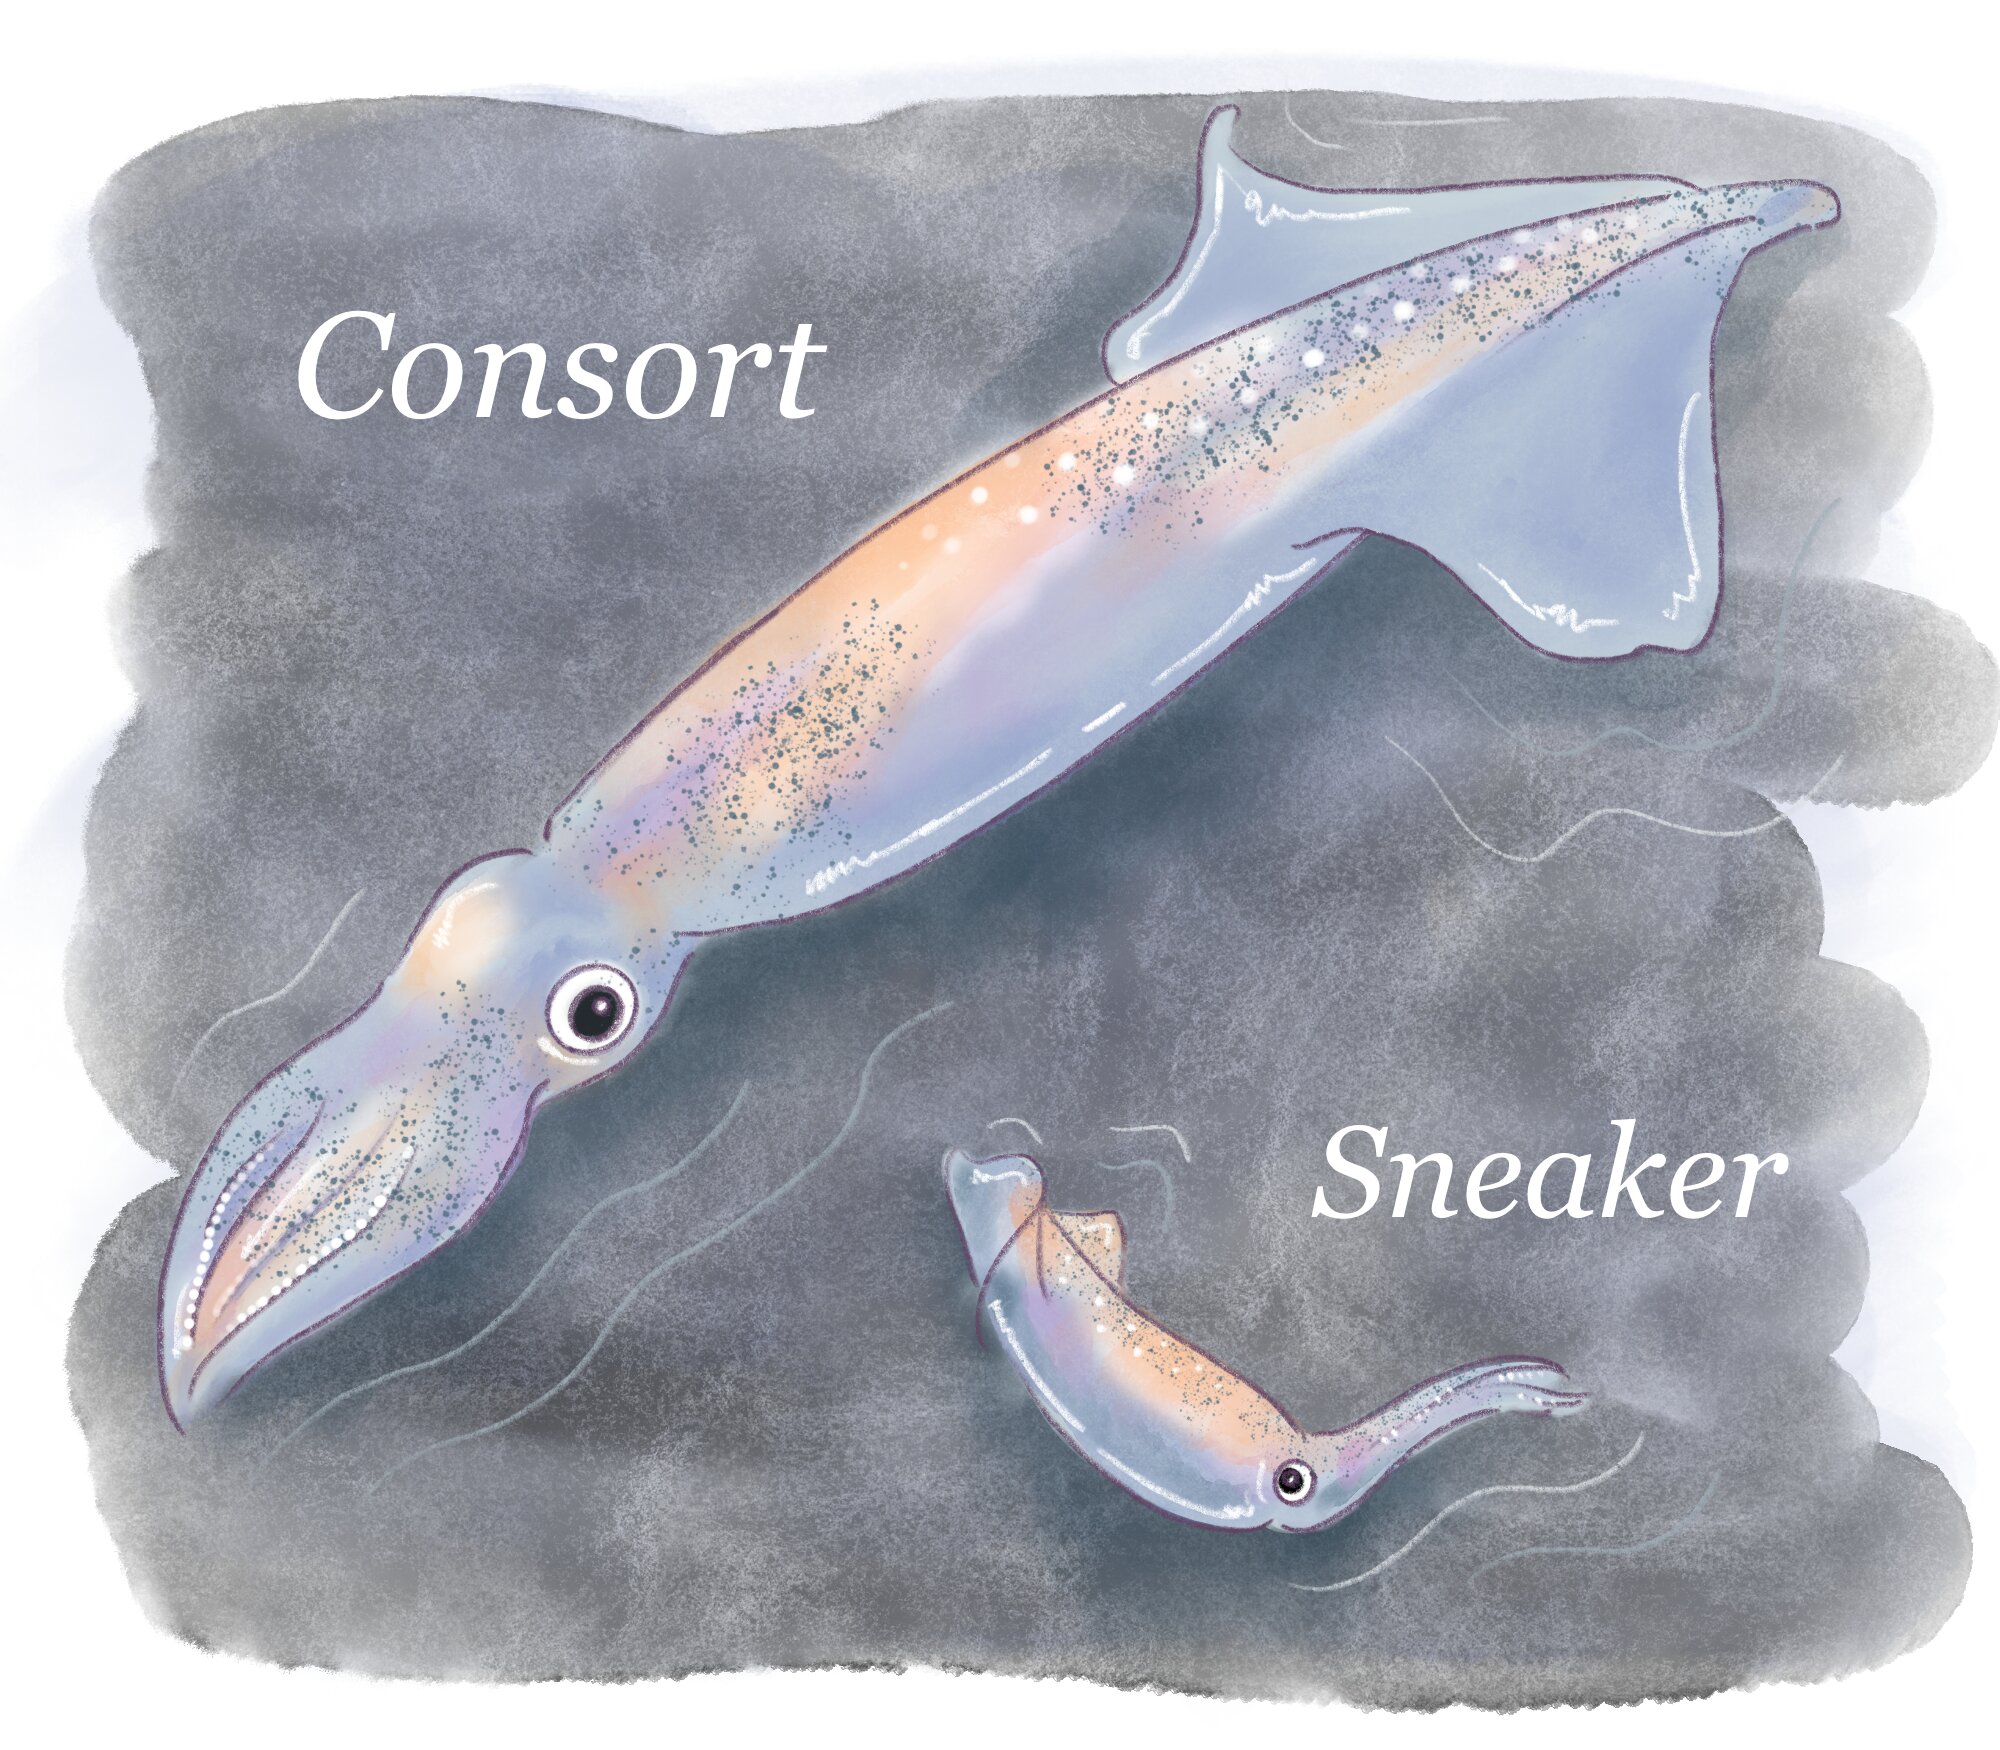 A graphic of the consort and sneaker squids. The consort is much larger and the sneaker is in the bottom right hand side of the graphic. Both squids are on the same grey watercolor style background.